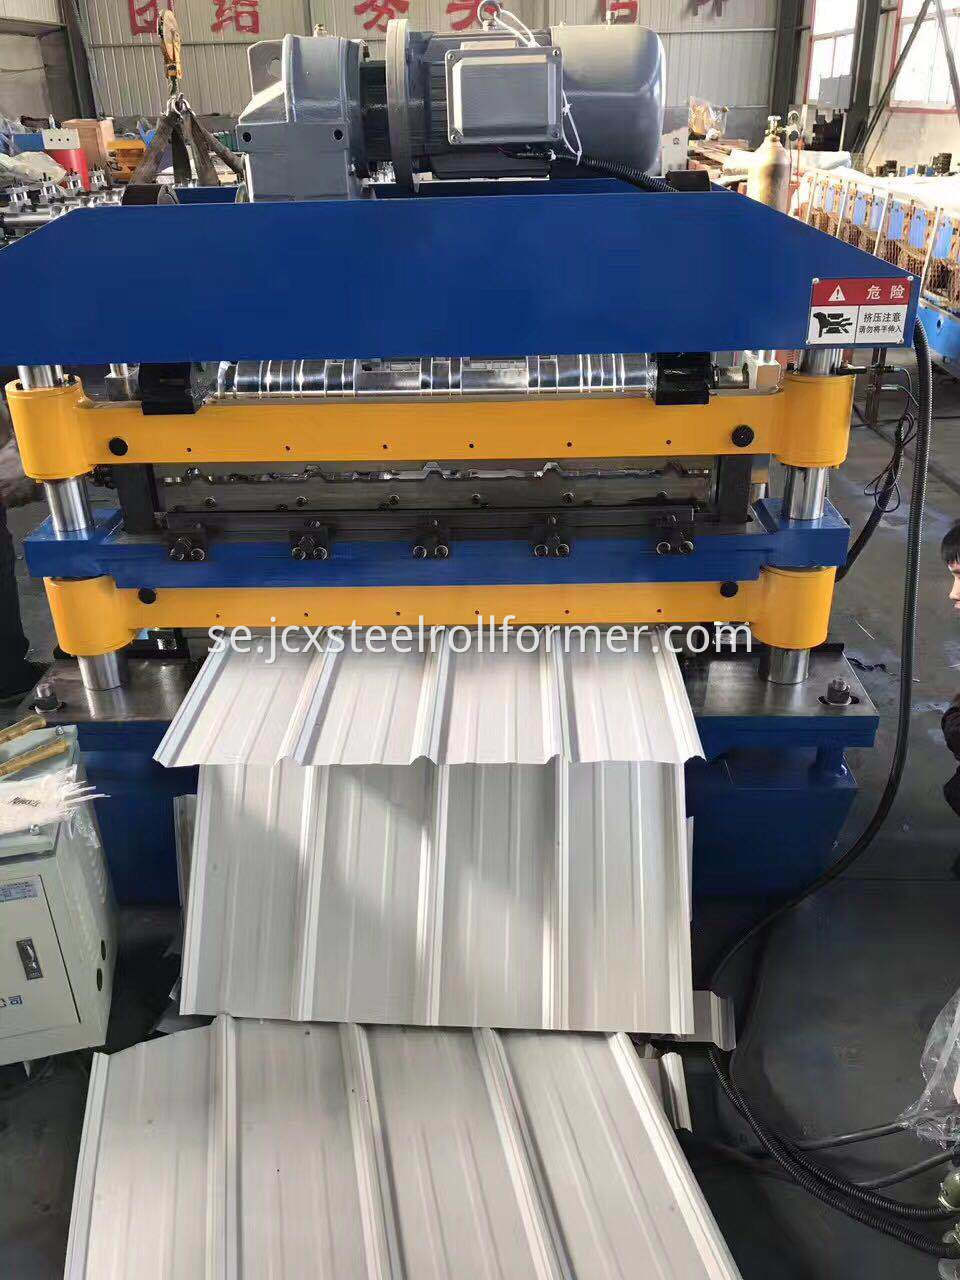 Metal Roofing Roll Forming Equipment